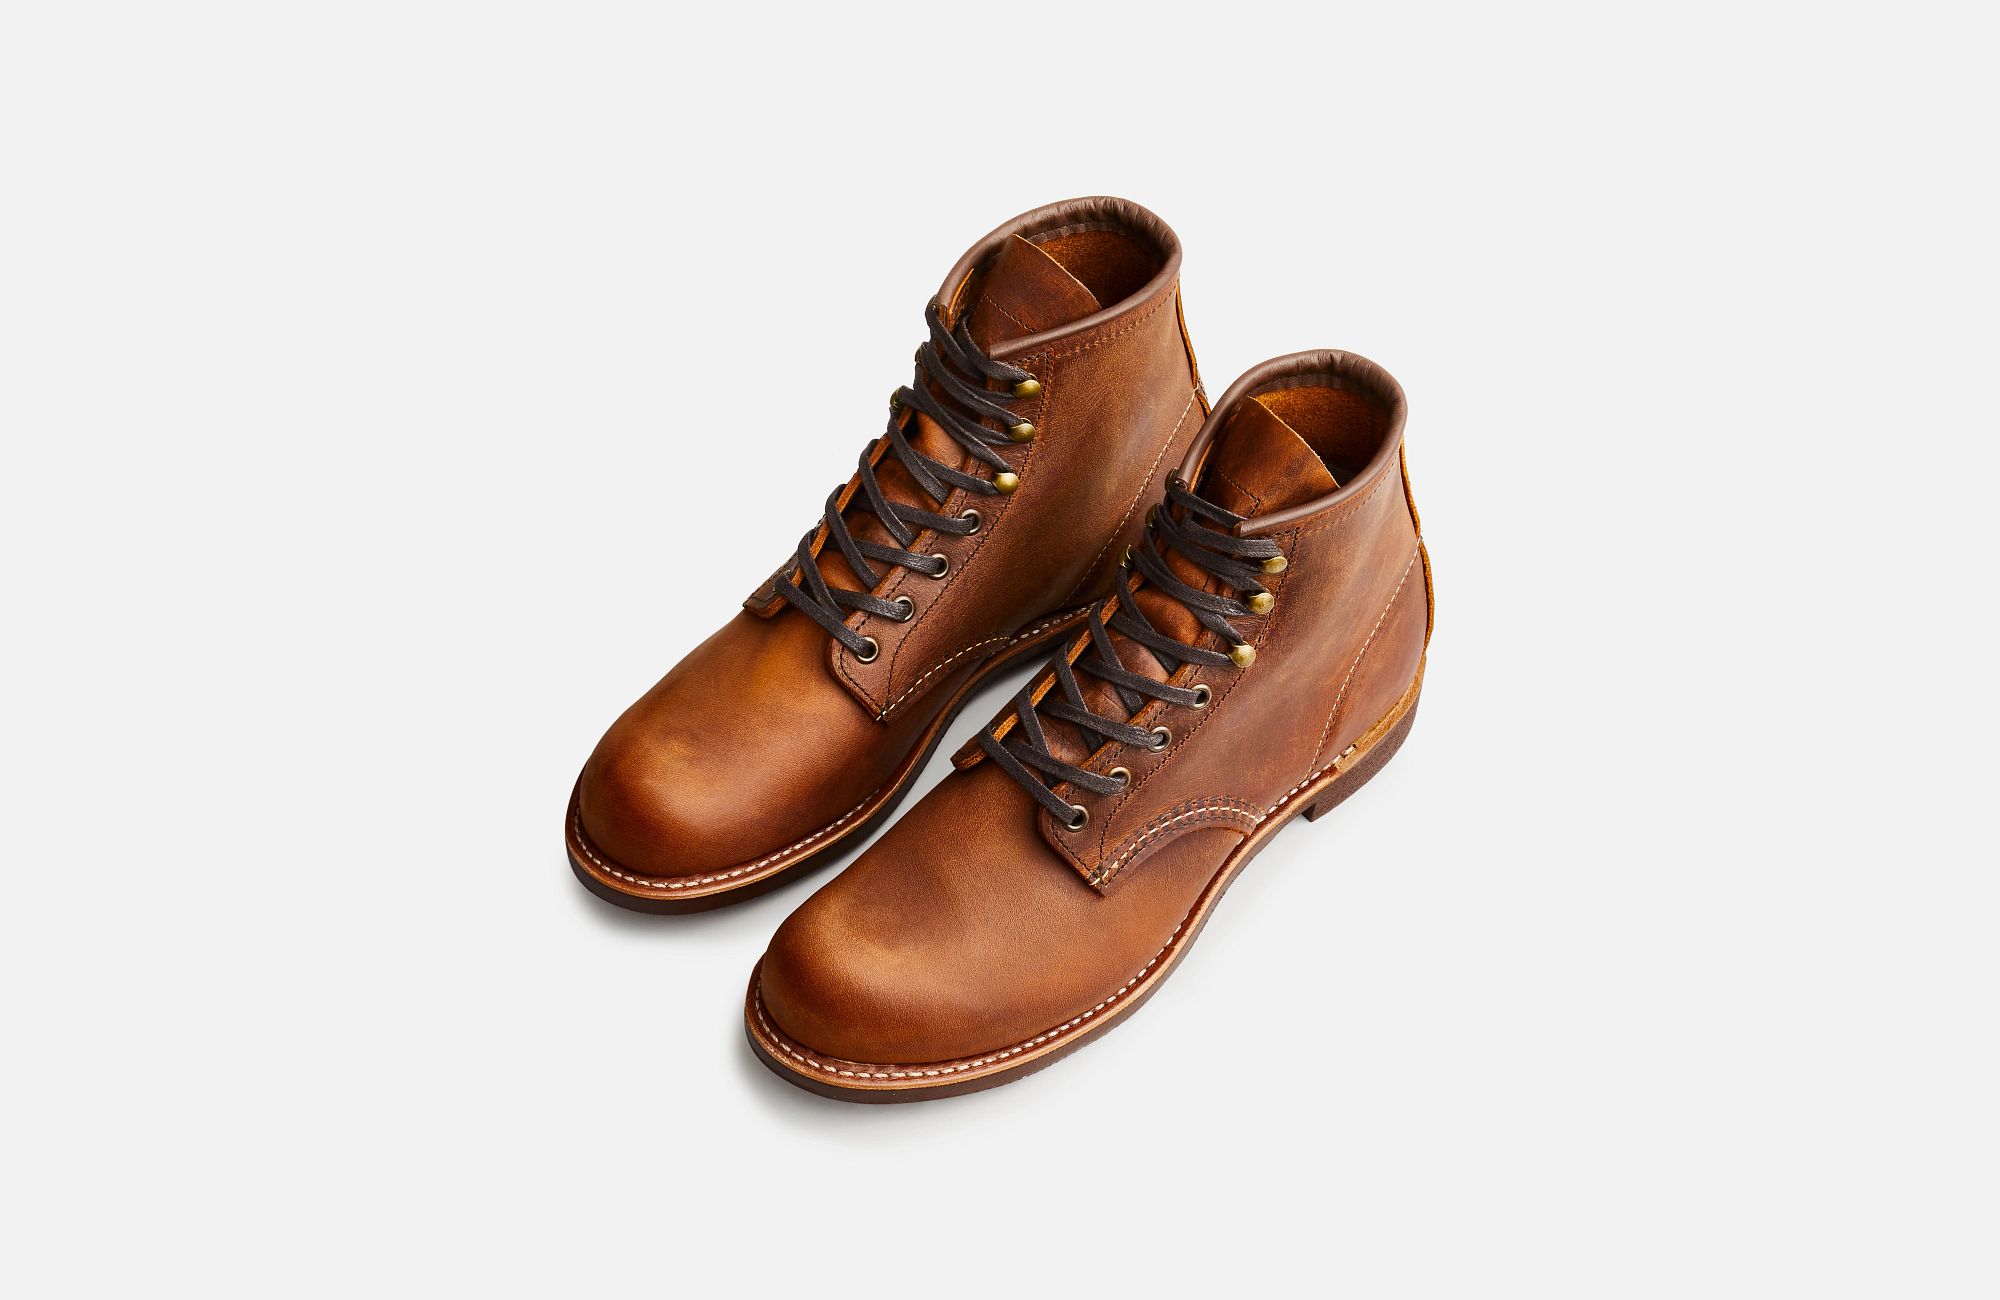 Men's Blacksmith 6-Inch Boot in Brown Leather 3343 | RedWing